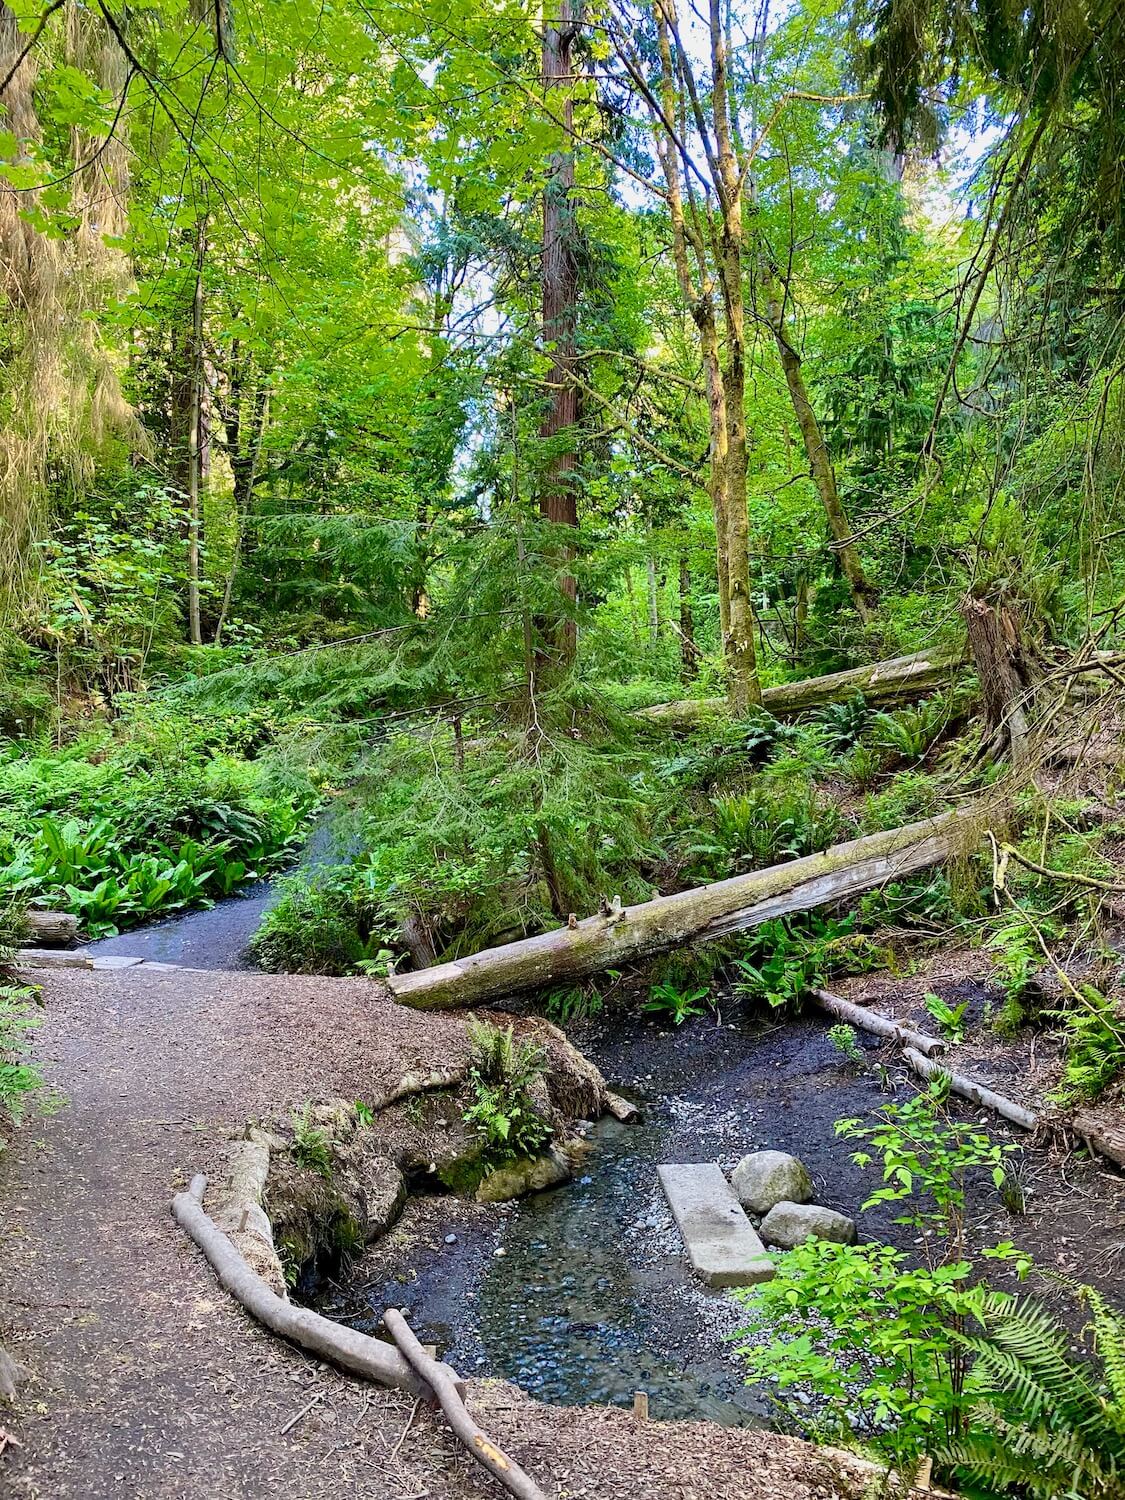 A small creek winds through the valley of Schmitz Preserve in West Seattle. There are ferns and pieces of wood in the foreground while fallen trees and a broad canopy of fresh green leaves encompass this spring forest scene.